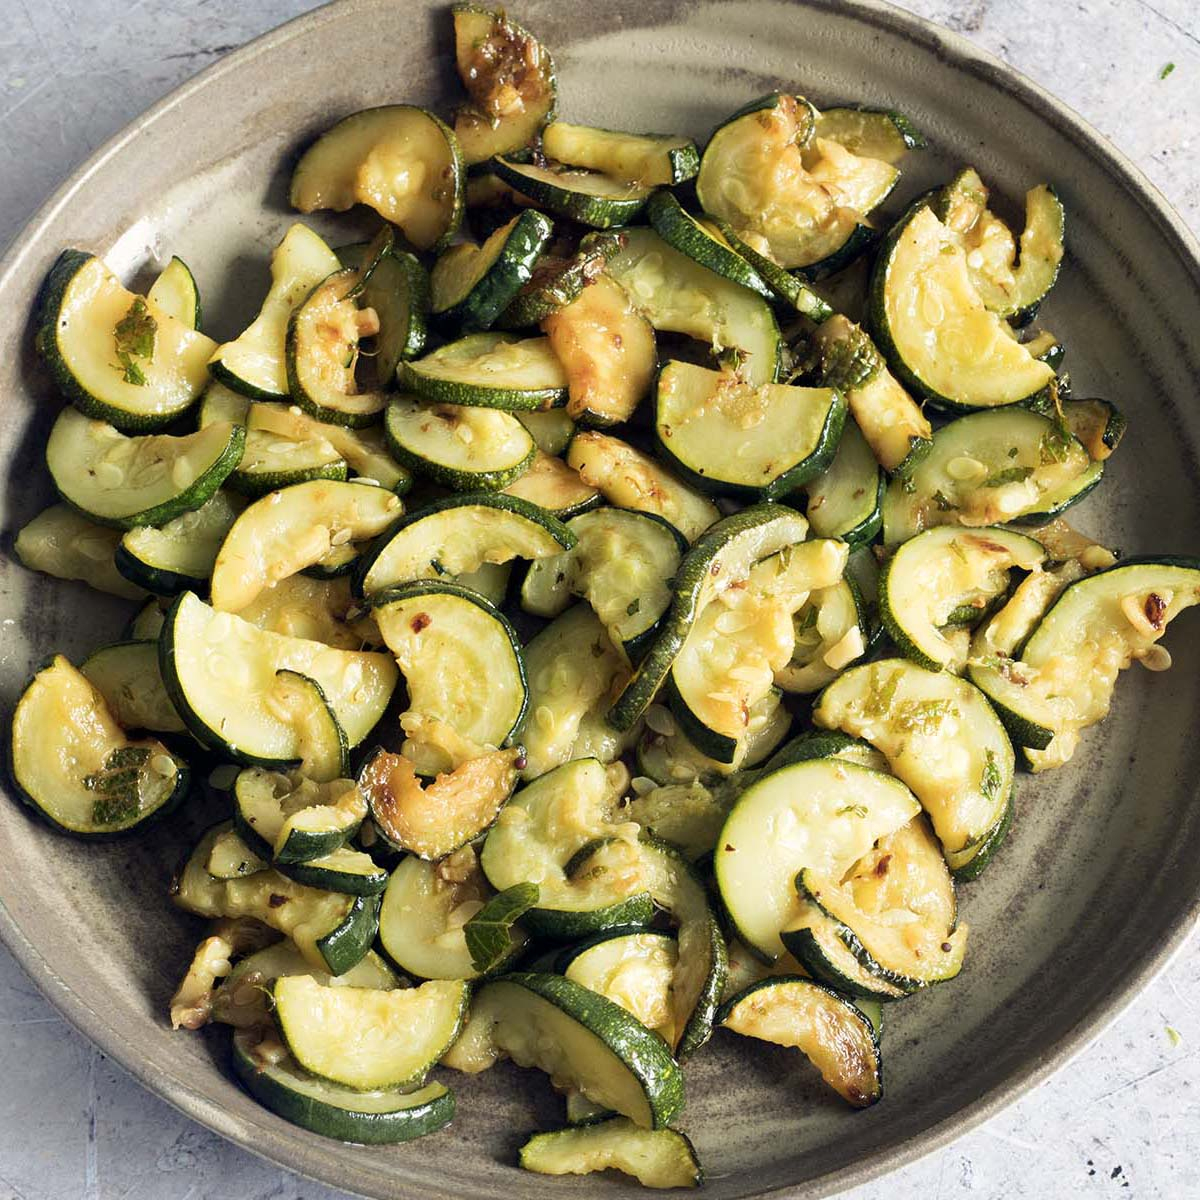 How To Cook Courgettes Vegetables - Herbs And Food Recipes intérieur Recette Courgette Healthy